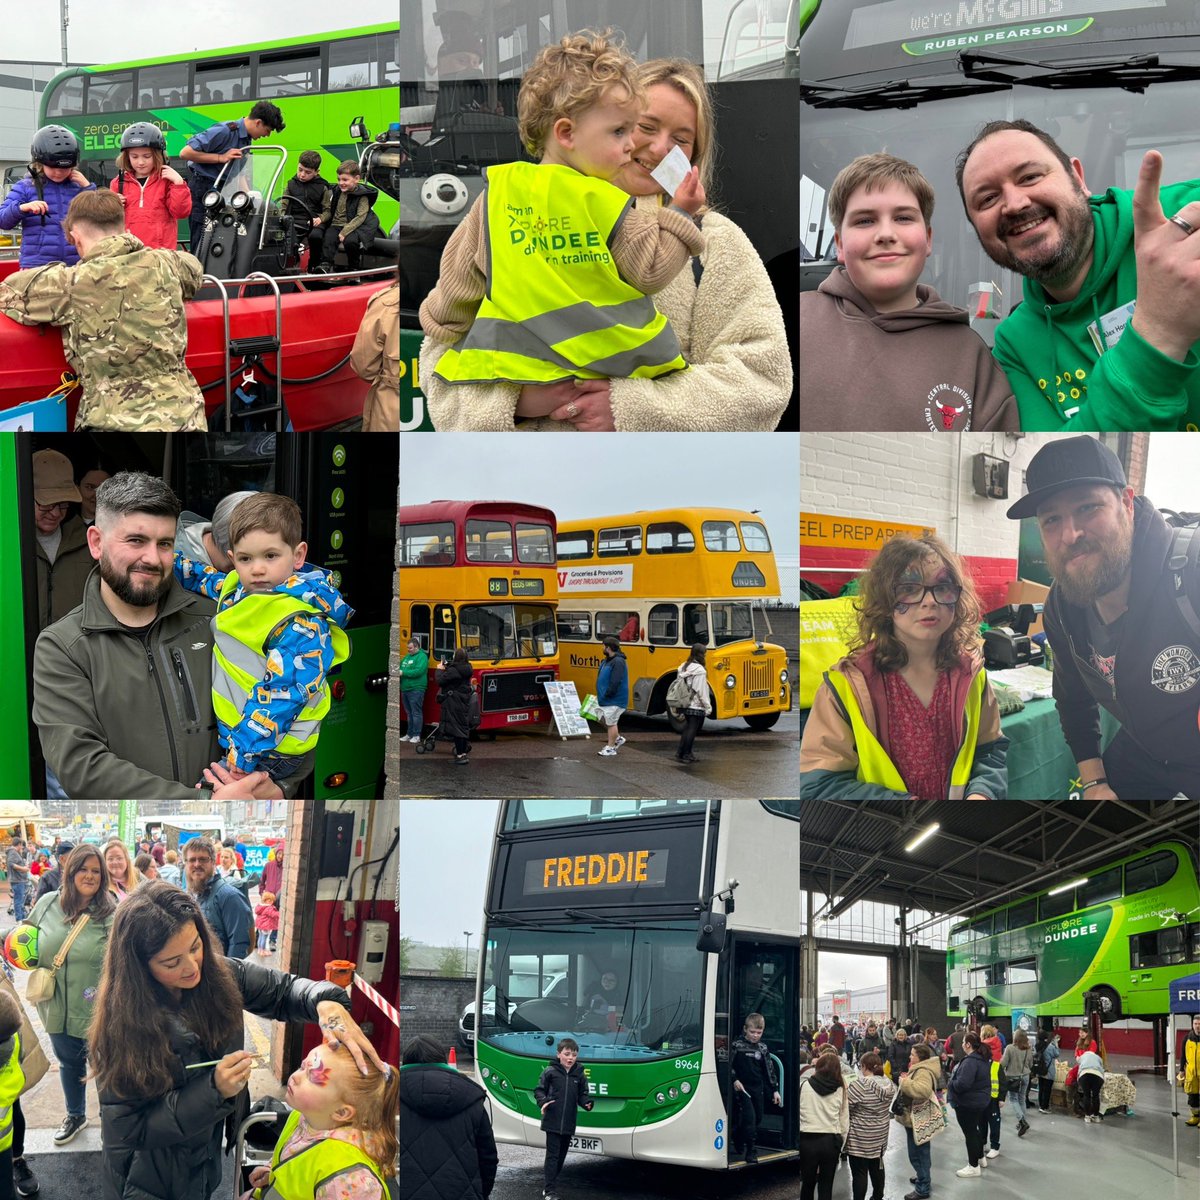 What a day! What a #BigBusShow 🥳 We loved every minute of it with you 💚 Thanks to all 2,238 who joined us, the exhibits, the visiting vehicles, and all who helped make it such a memorable day 🙏